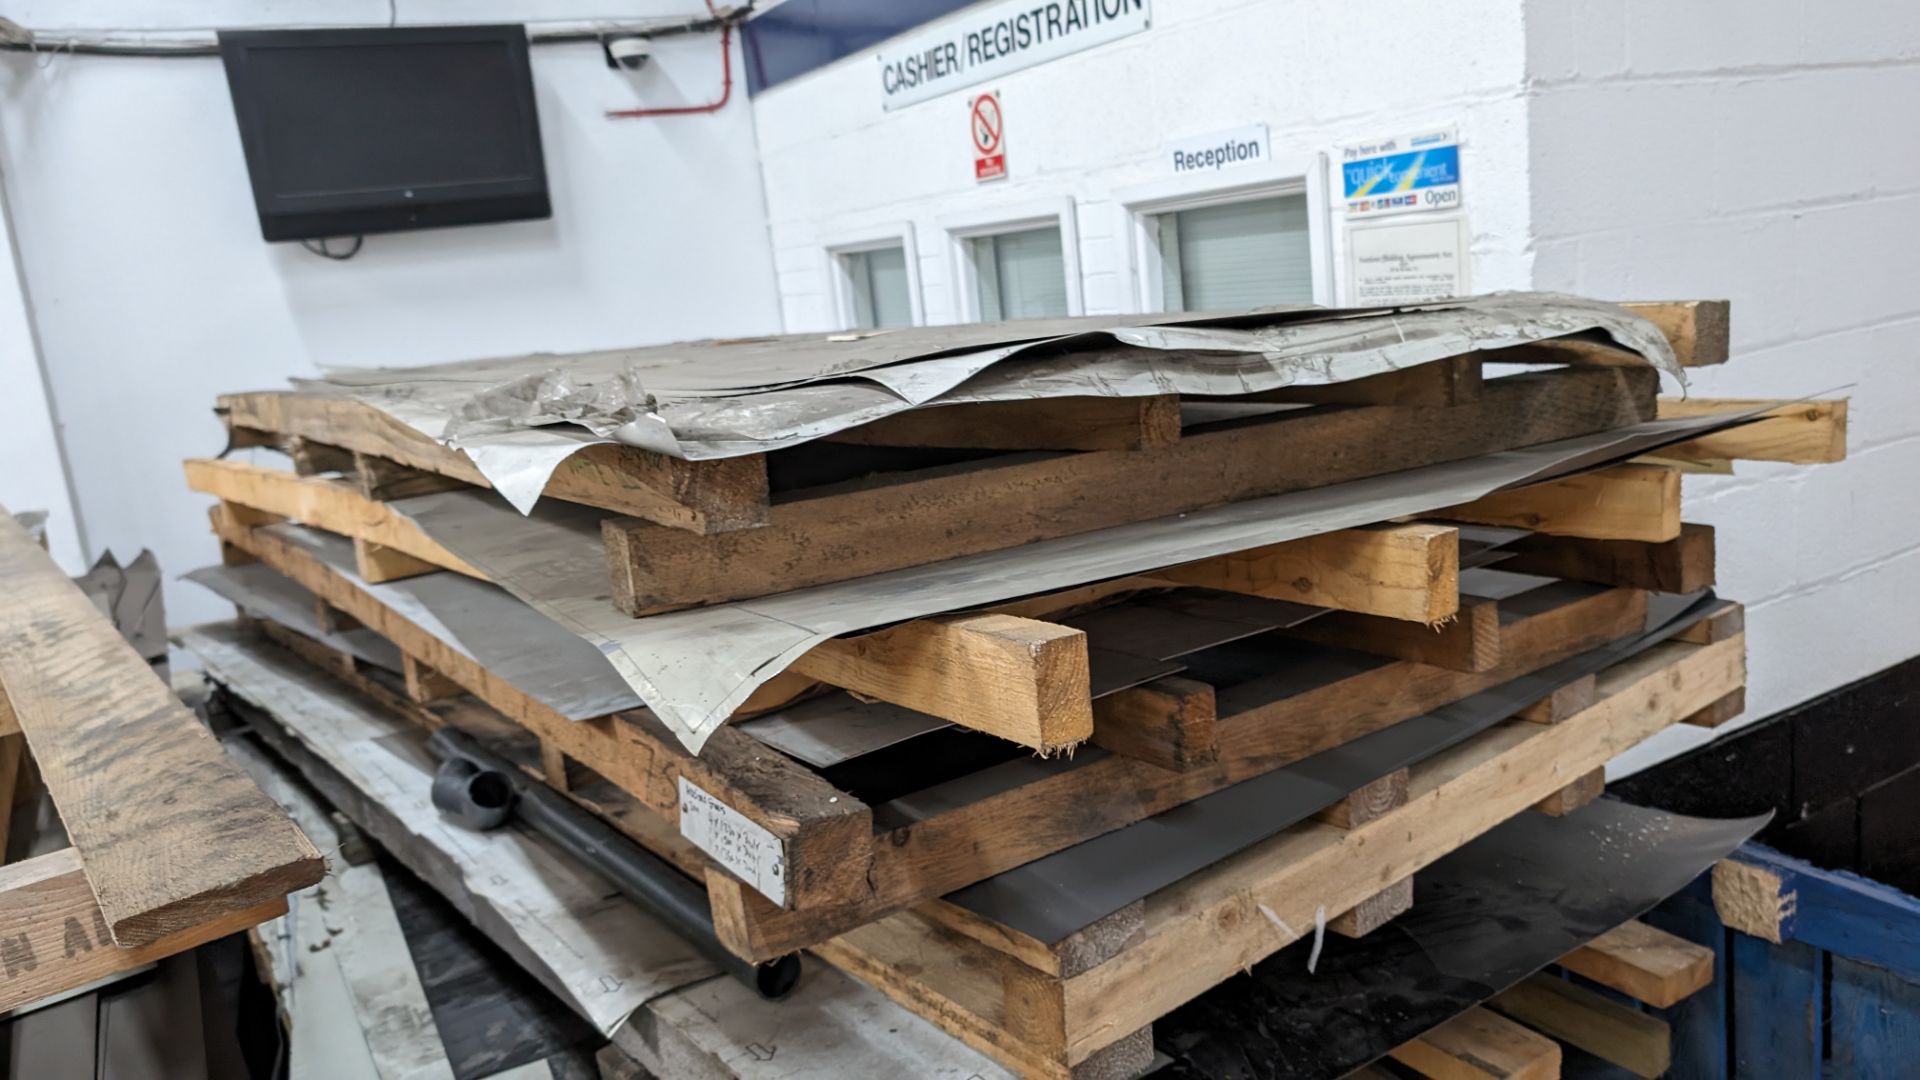 2 stacks of 1250 x 3000mm sheet materials. Each stack comprises 10 - 12 oversized pallets, each pal - Image 8 of 21